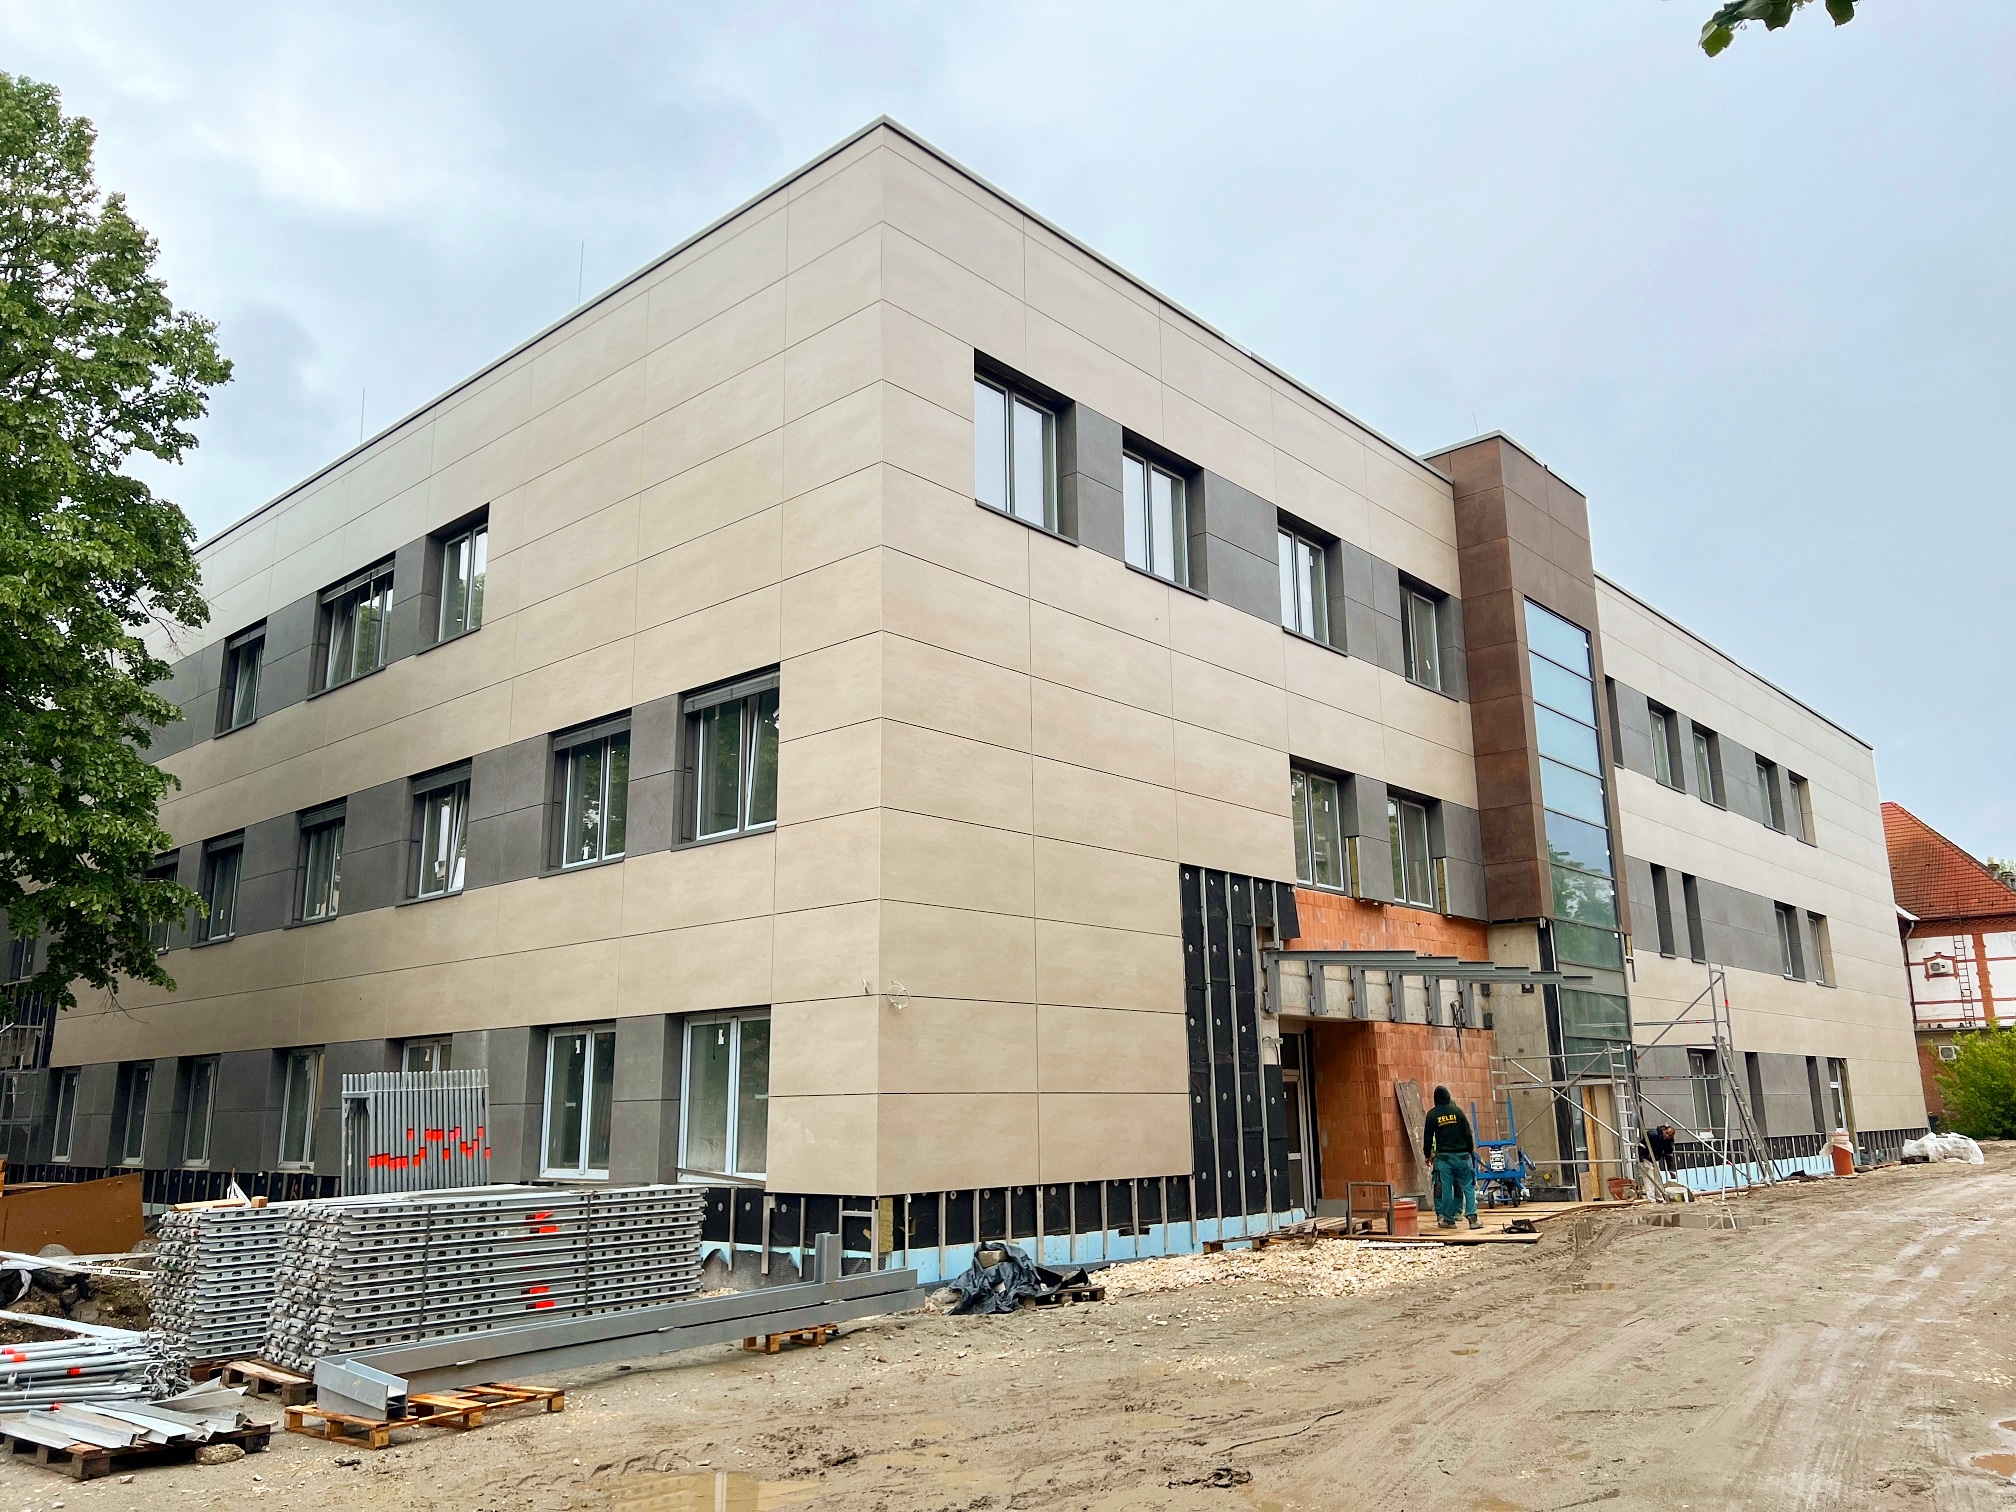 Hungary’s Largest Hospital Investment Ready for Handover [Video]